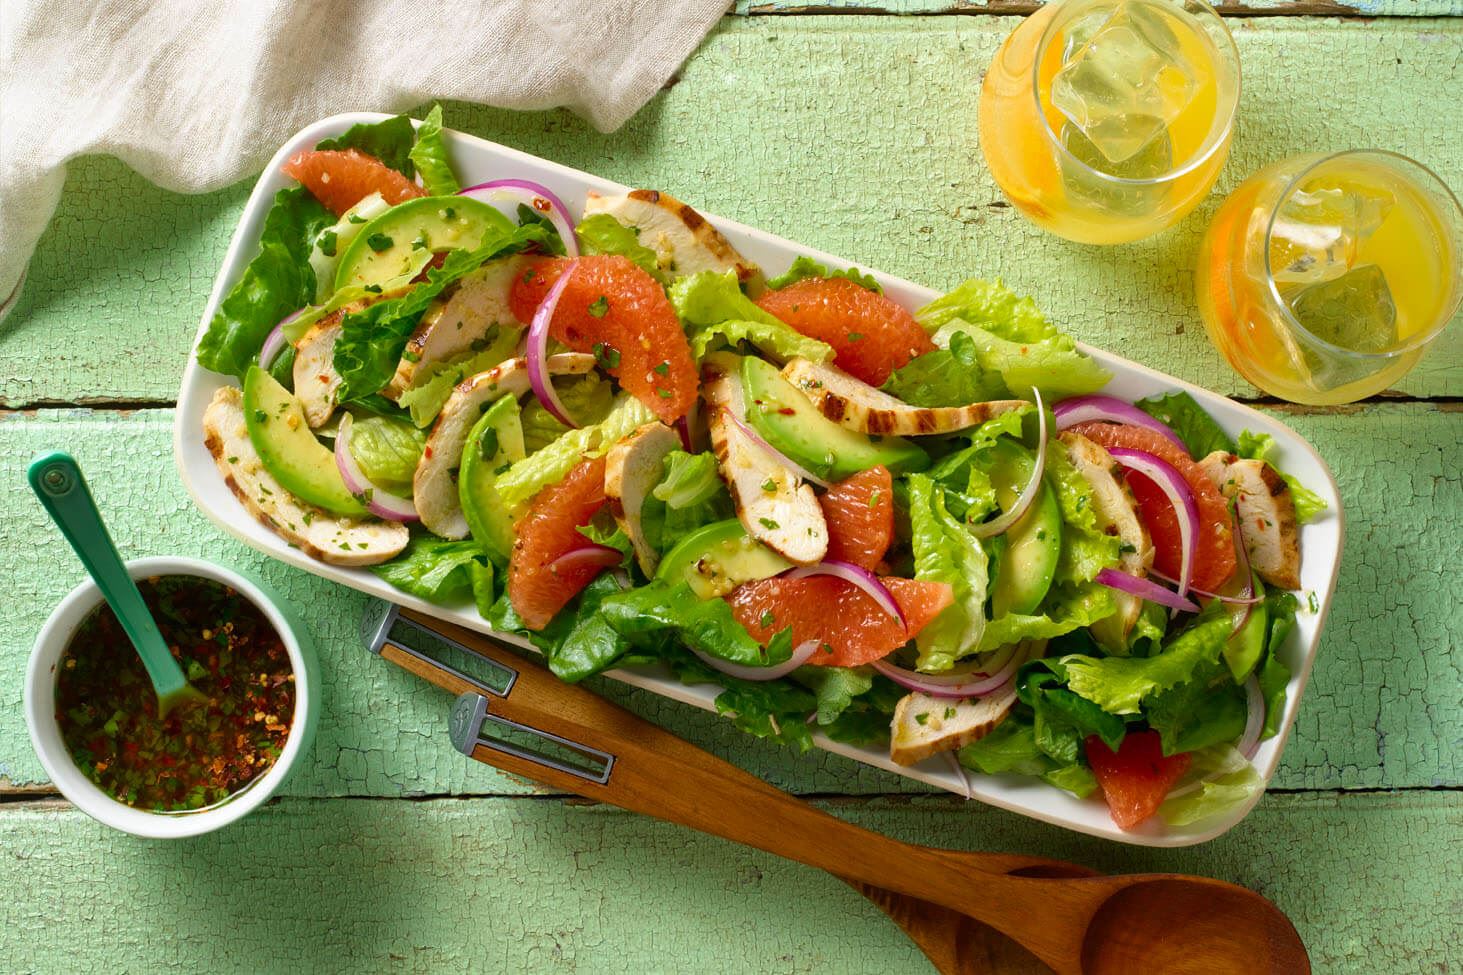 Grilled Chicken Salad with Avocado and Grapefruit